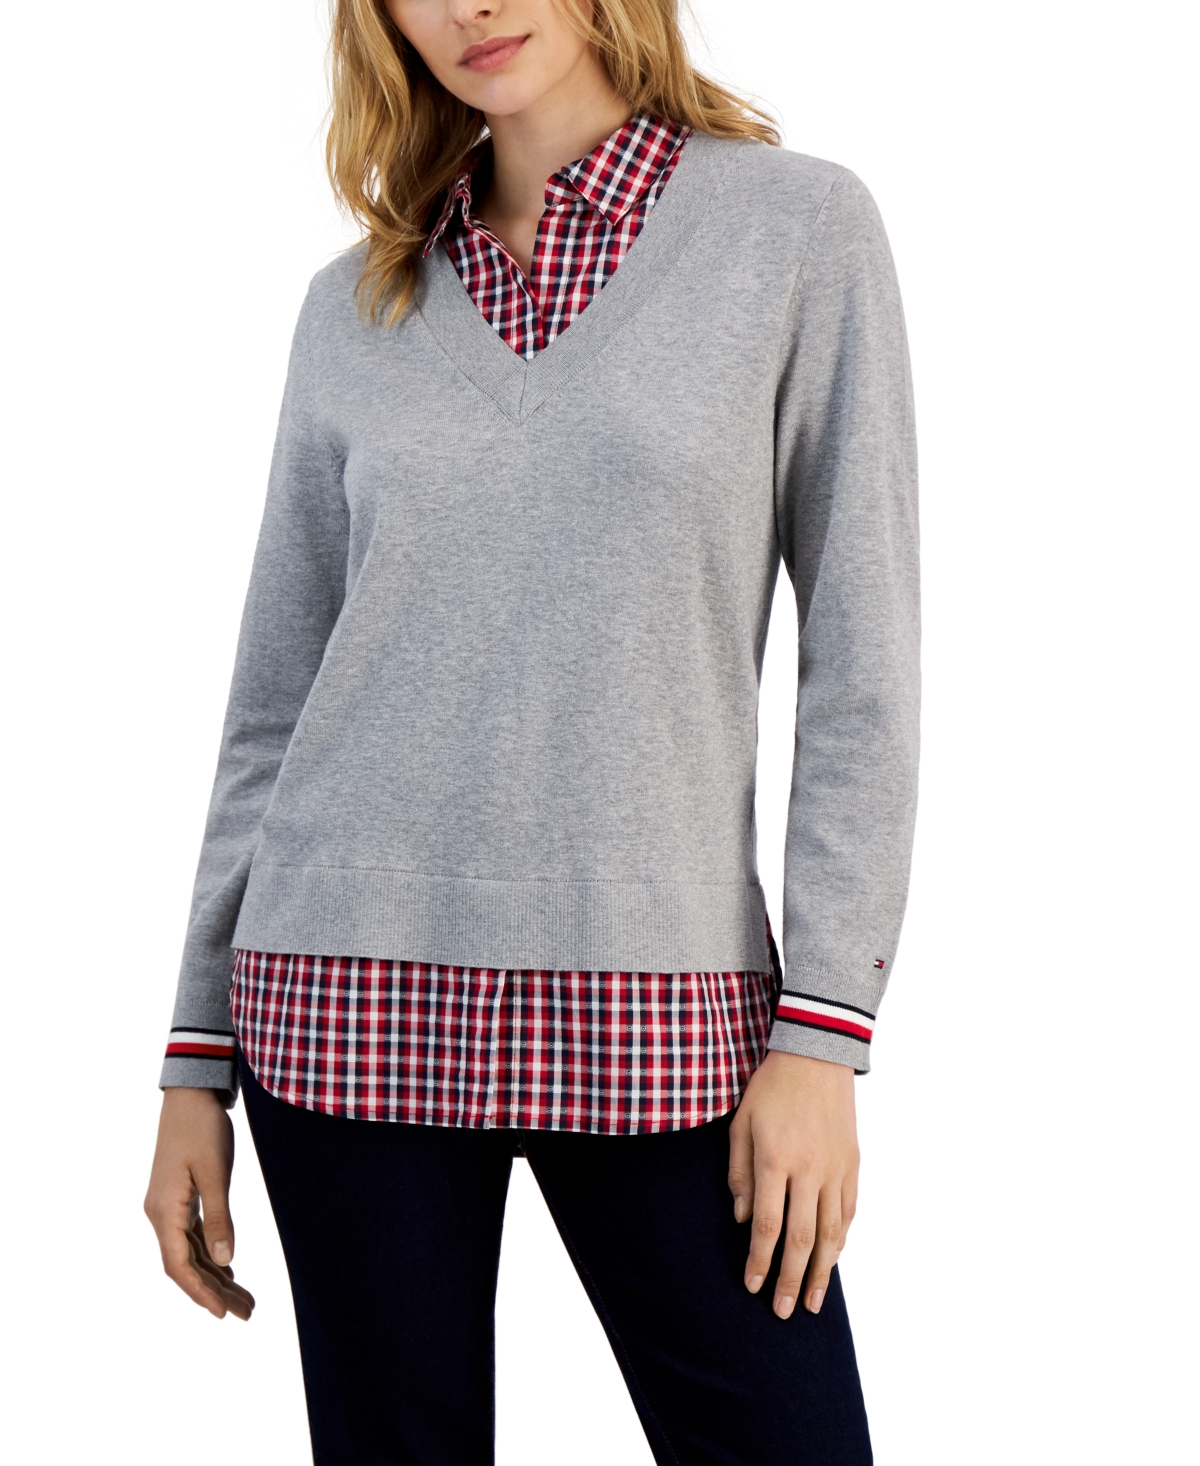 Tommy Hilfiger Women's Cotton Layered-Look Sweater